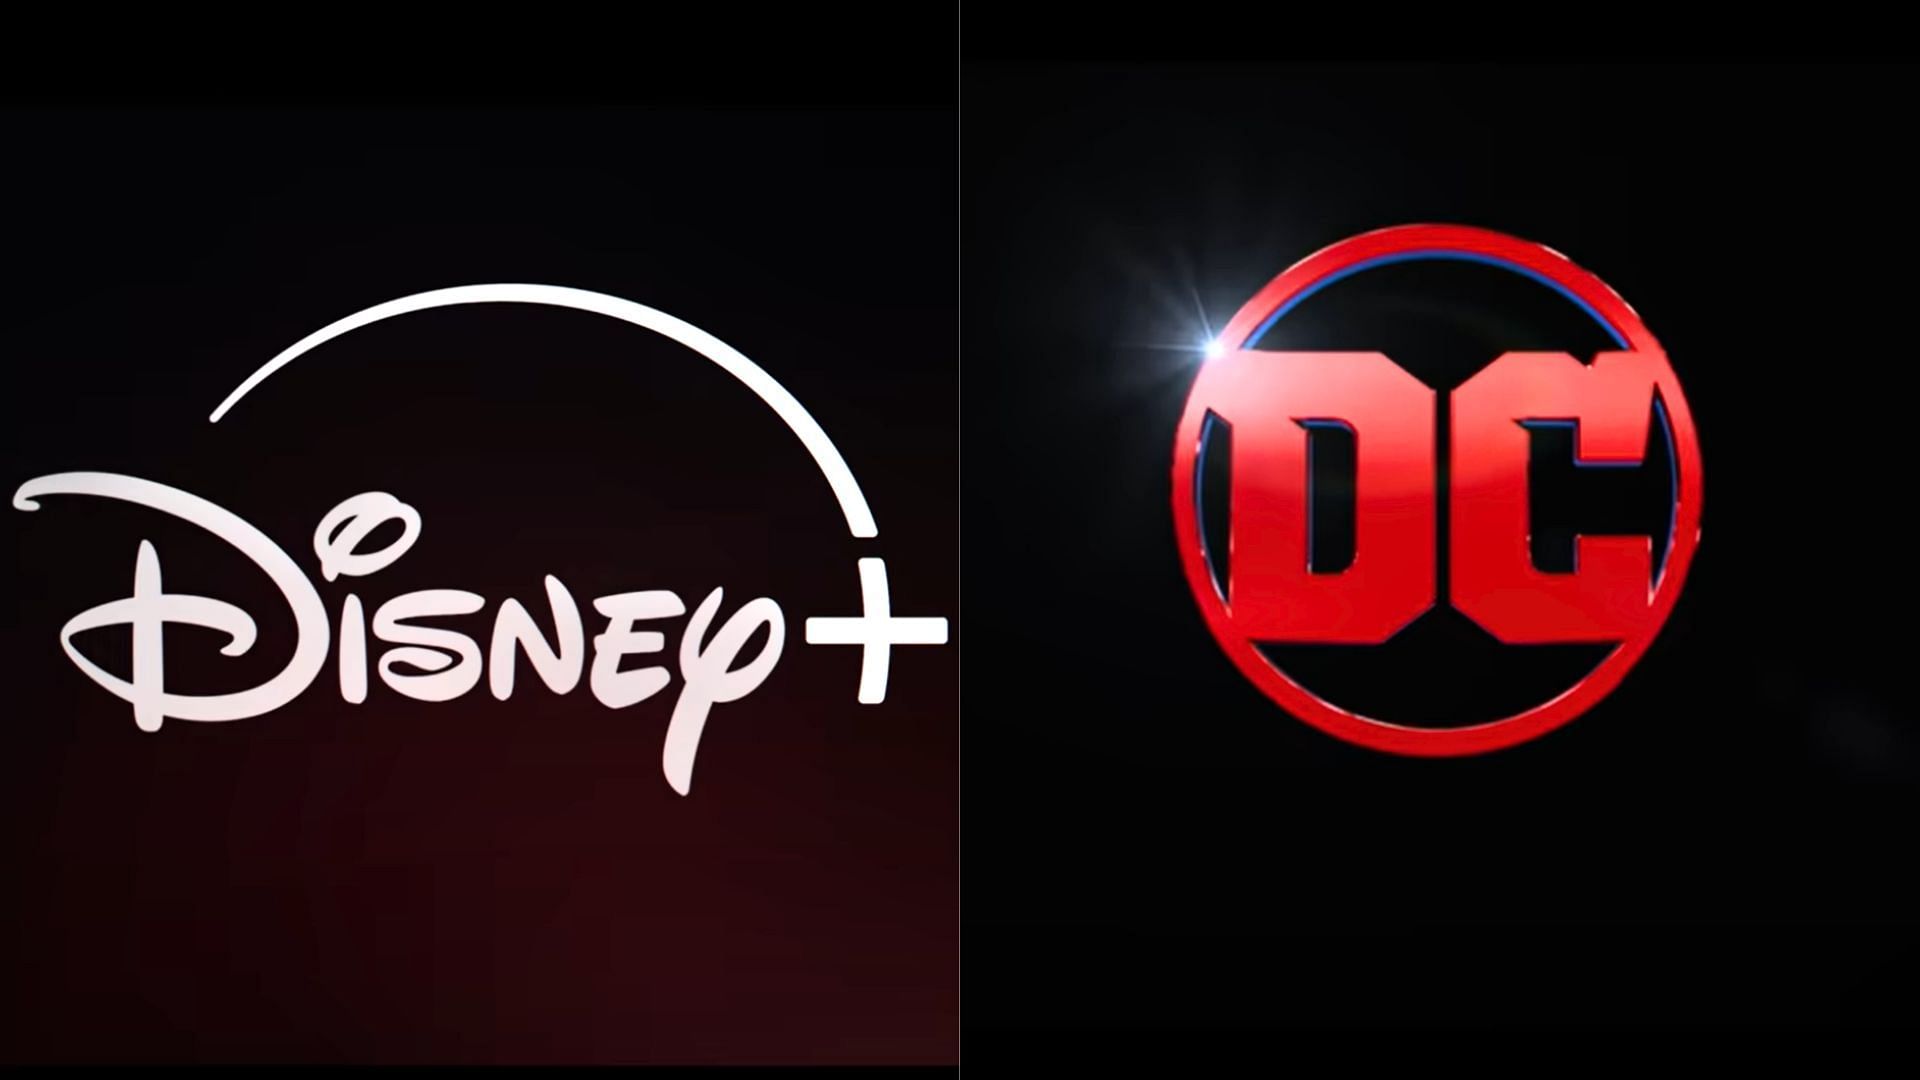 Disney+ is host to four DC movies for the first time (Image via Disney and WB)